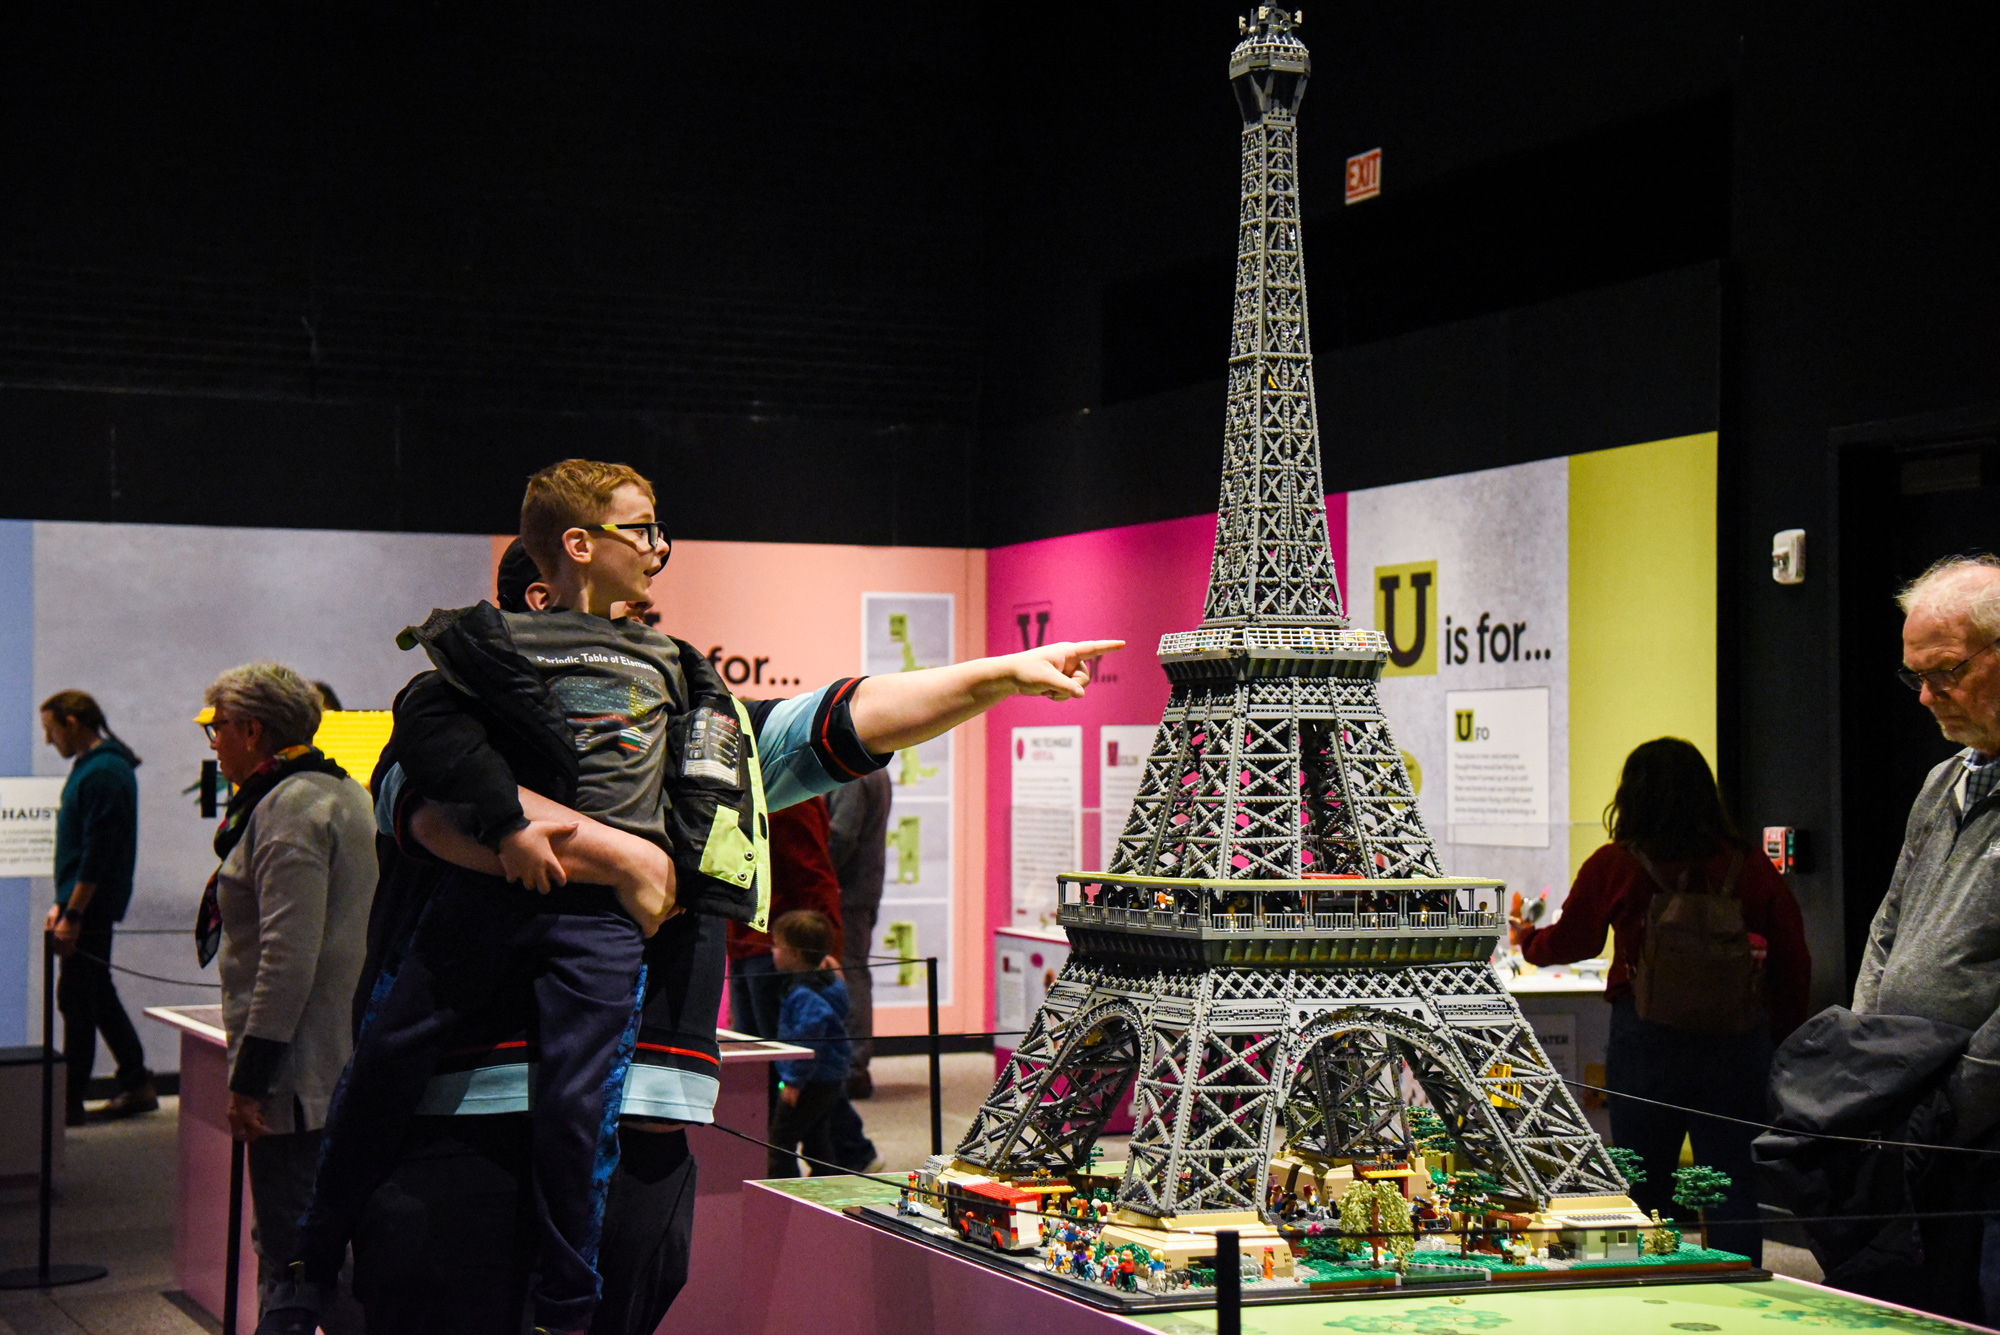 Photo from Bricktionary of an Eiffel Tower model